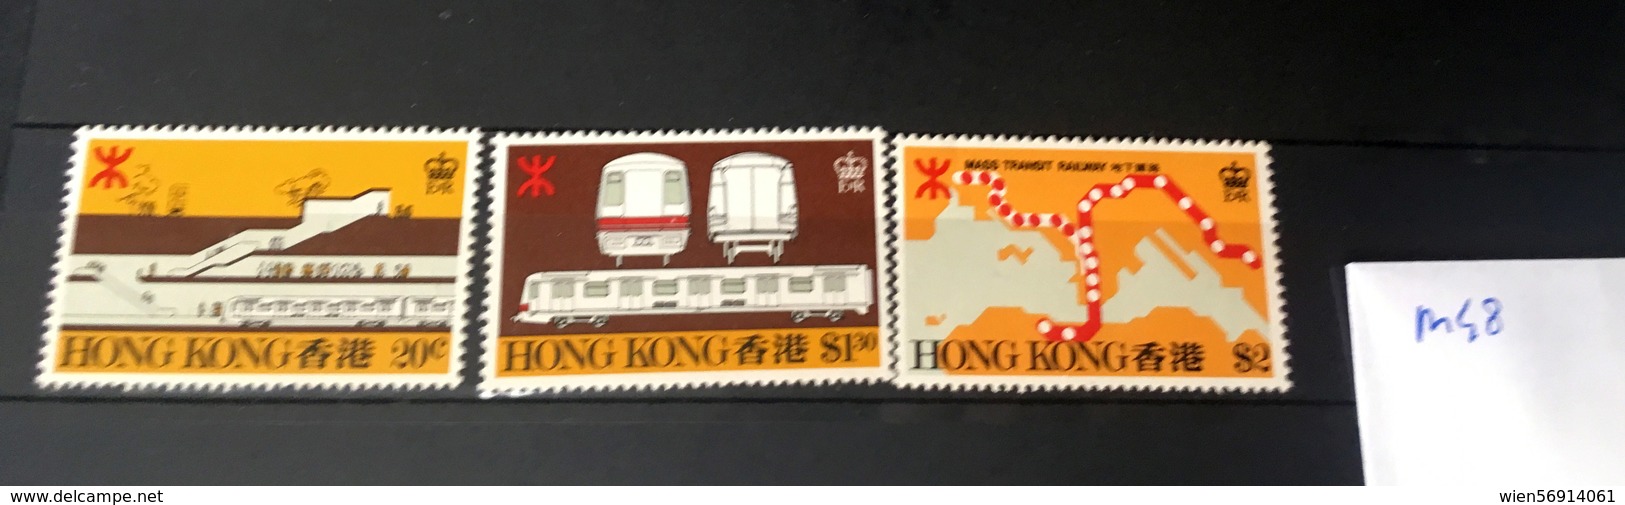 M48 Hong Kong Selection - Unused Stamps